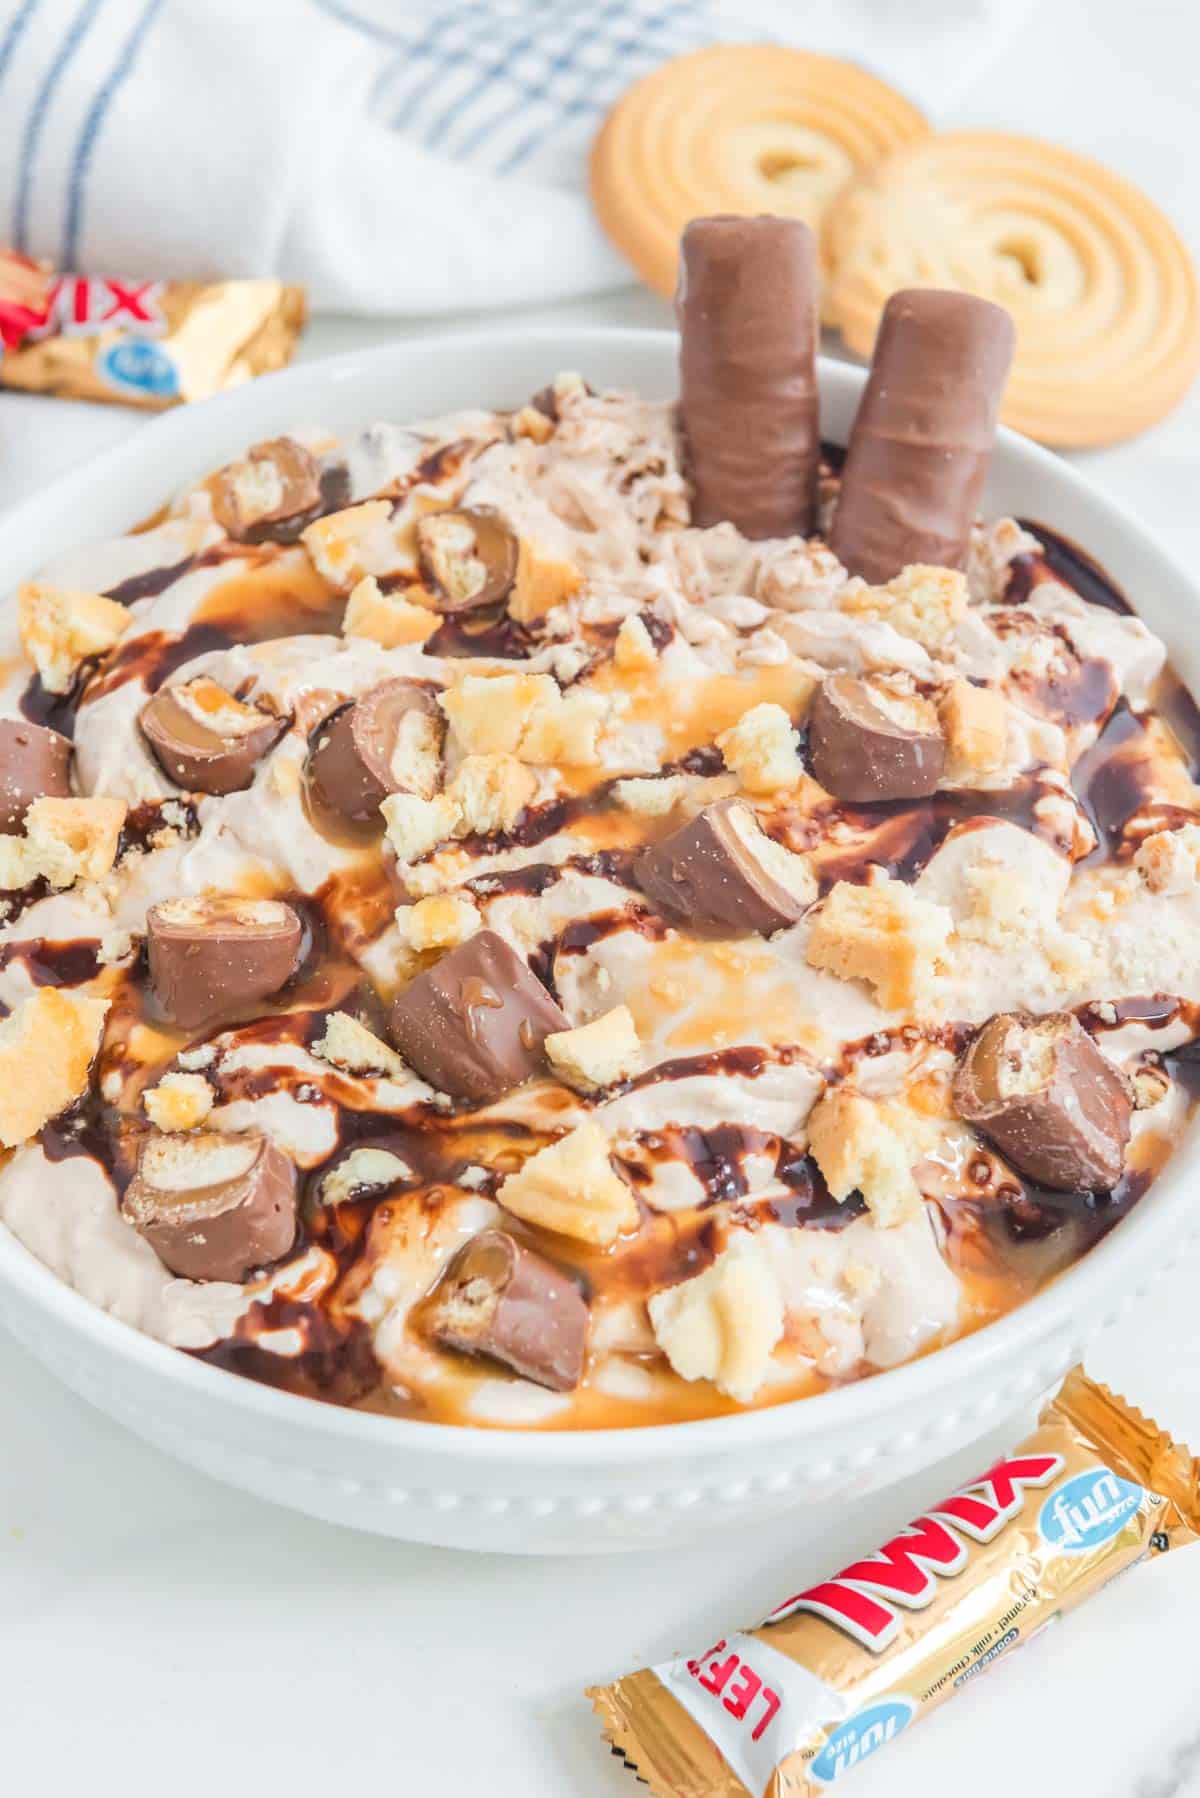 A bowl of ice cream with chocolate and peanut butter.